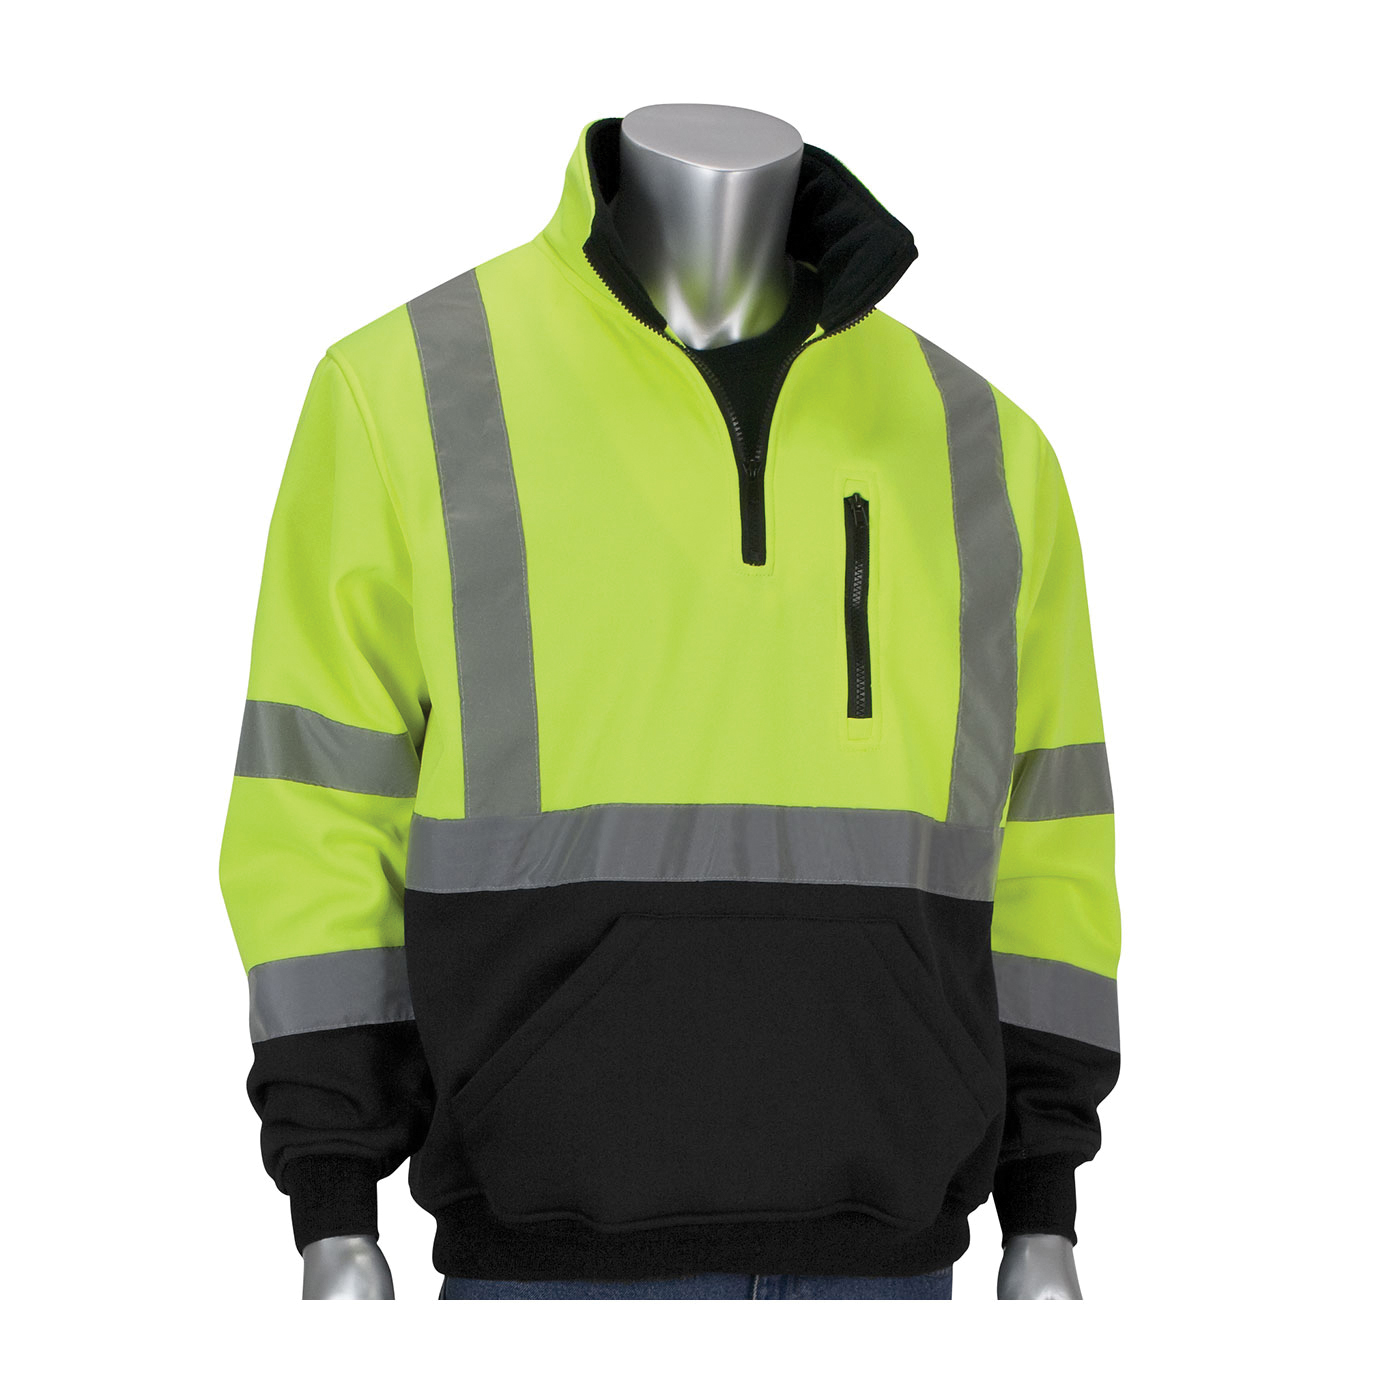 PIP® 323-1330B-LY/2X Sweatshirt With Black Bottom, Unisex, 2XL, Lime Yellow, 31-1/2 in L, Polyester Fleece